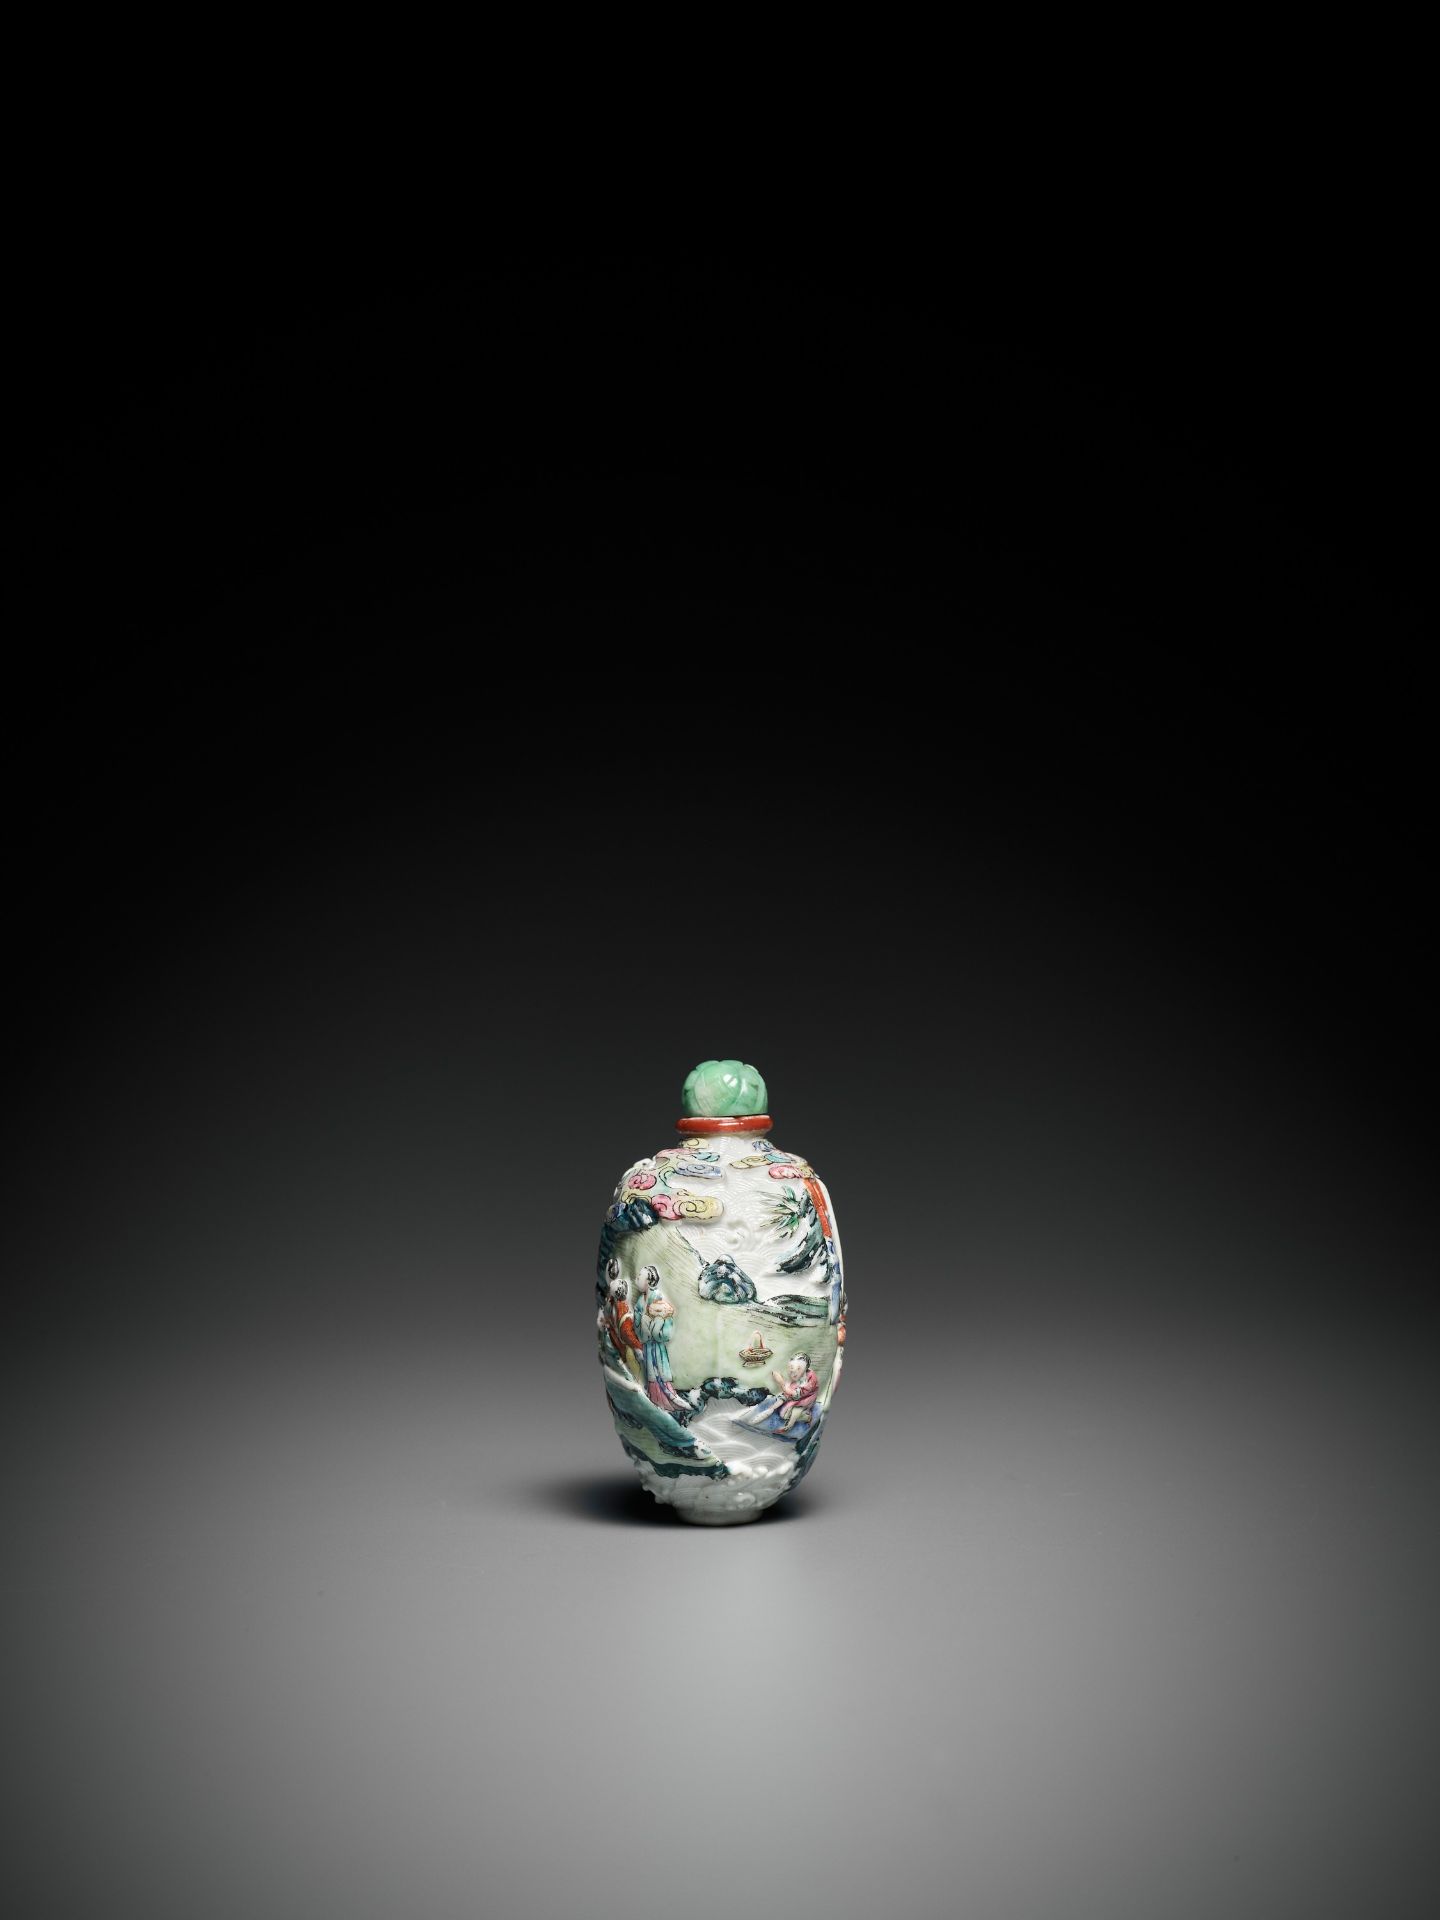 AN IMPERIAL MOLDED AND ENAMELED PORCELAIN SNUFF BOTTLE, JIAQING MARK AND PERIOD - Image 5 of 8